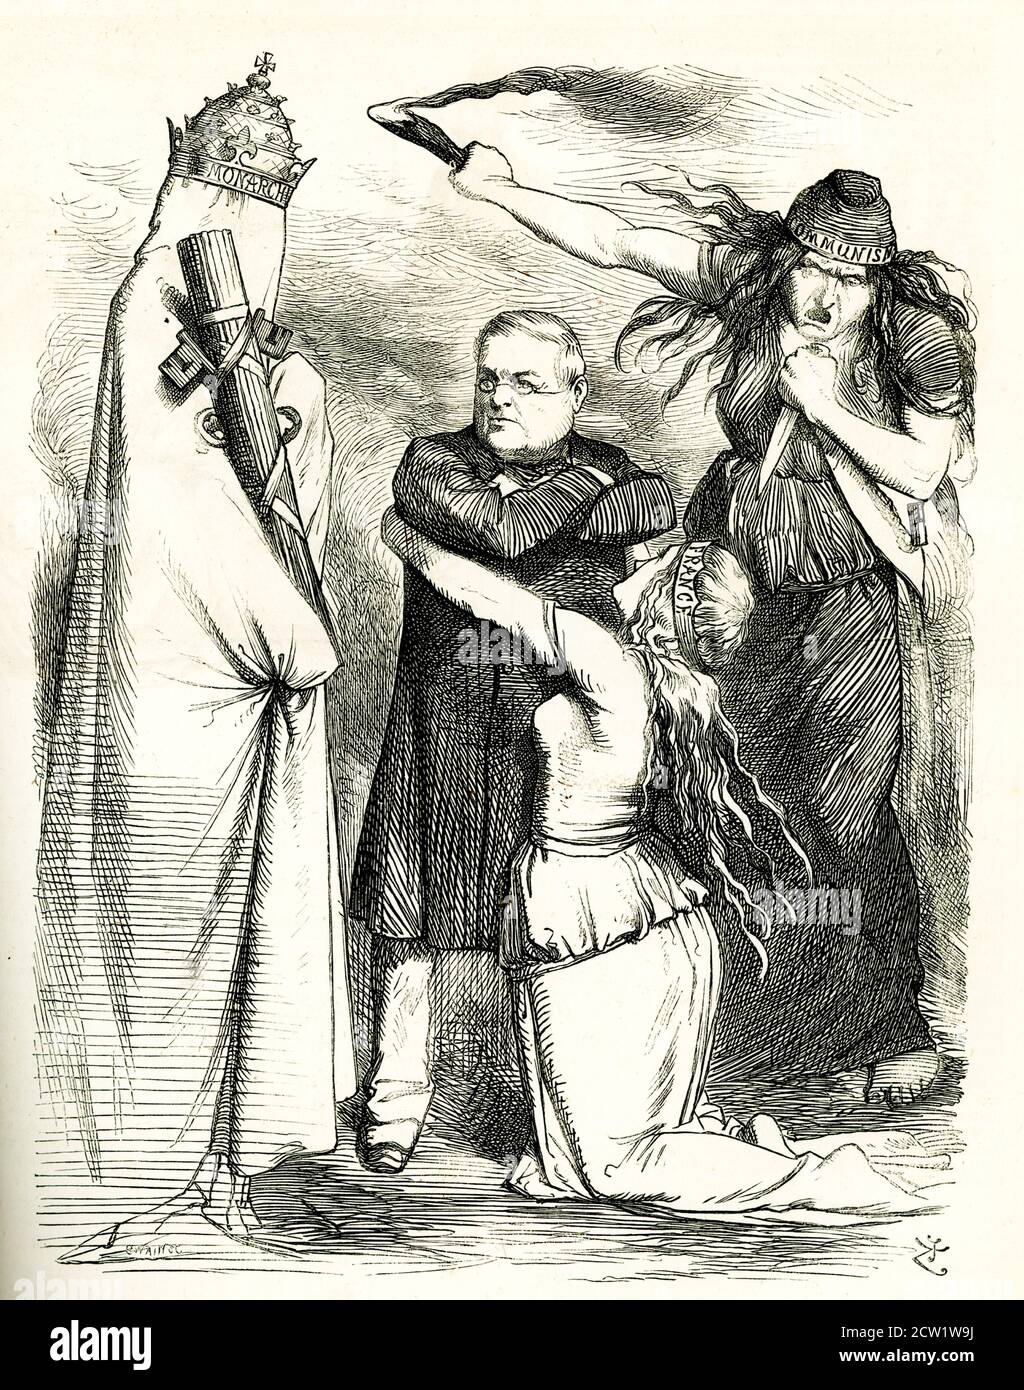 The caption for this illustration reads: Between Two terrors (“White” and “Red”). The labels on the characters from left to right are: Monarchy, France, Communism. The man  represents Louis Adolphe Thiers, the first President of the Third Republic. The figure representing France embraces him. To the right is the threatening figure of Communism, and to the left the shrouded figure of Monarchy. Opposed by the monarchists in the French assembly and the left wing of the Republicans, Thiers resigned on 24 May 1873. It is taken from the Punch Almanac for 1873. Its date is October 18, 1873. Punch, or Stock Photo